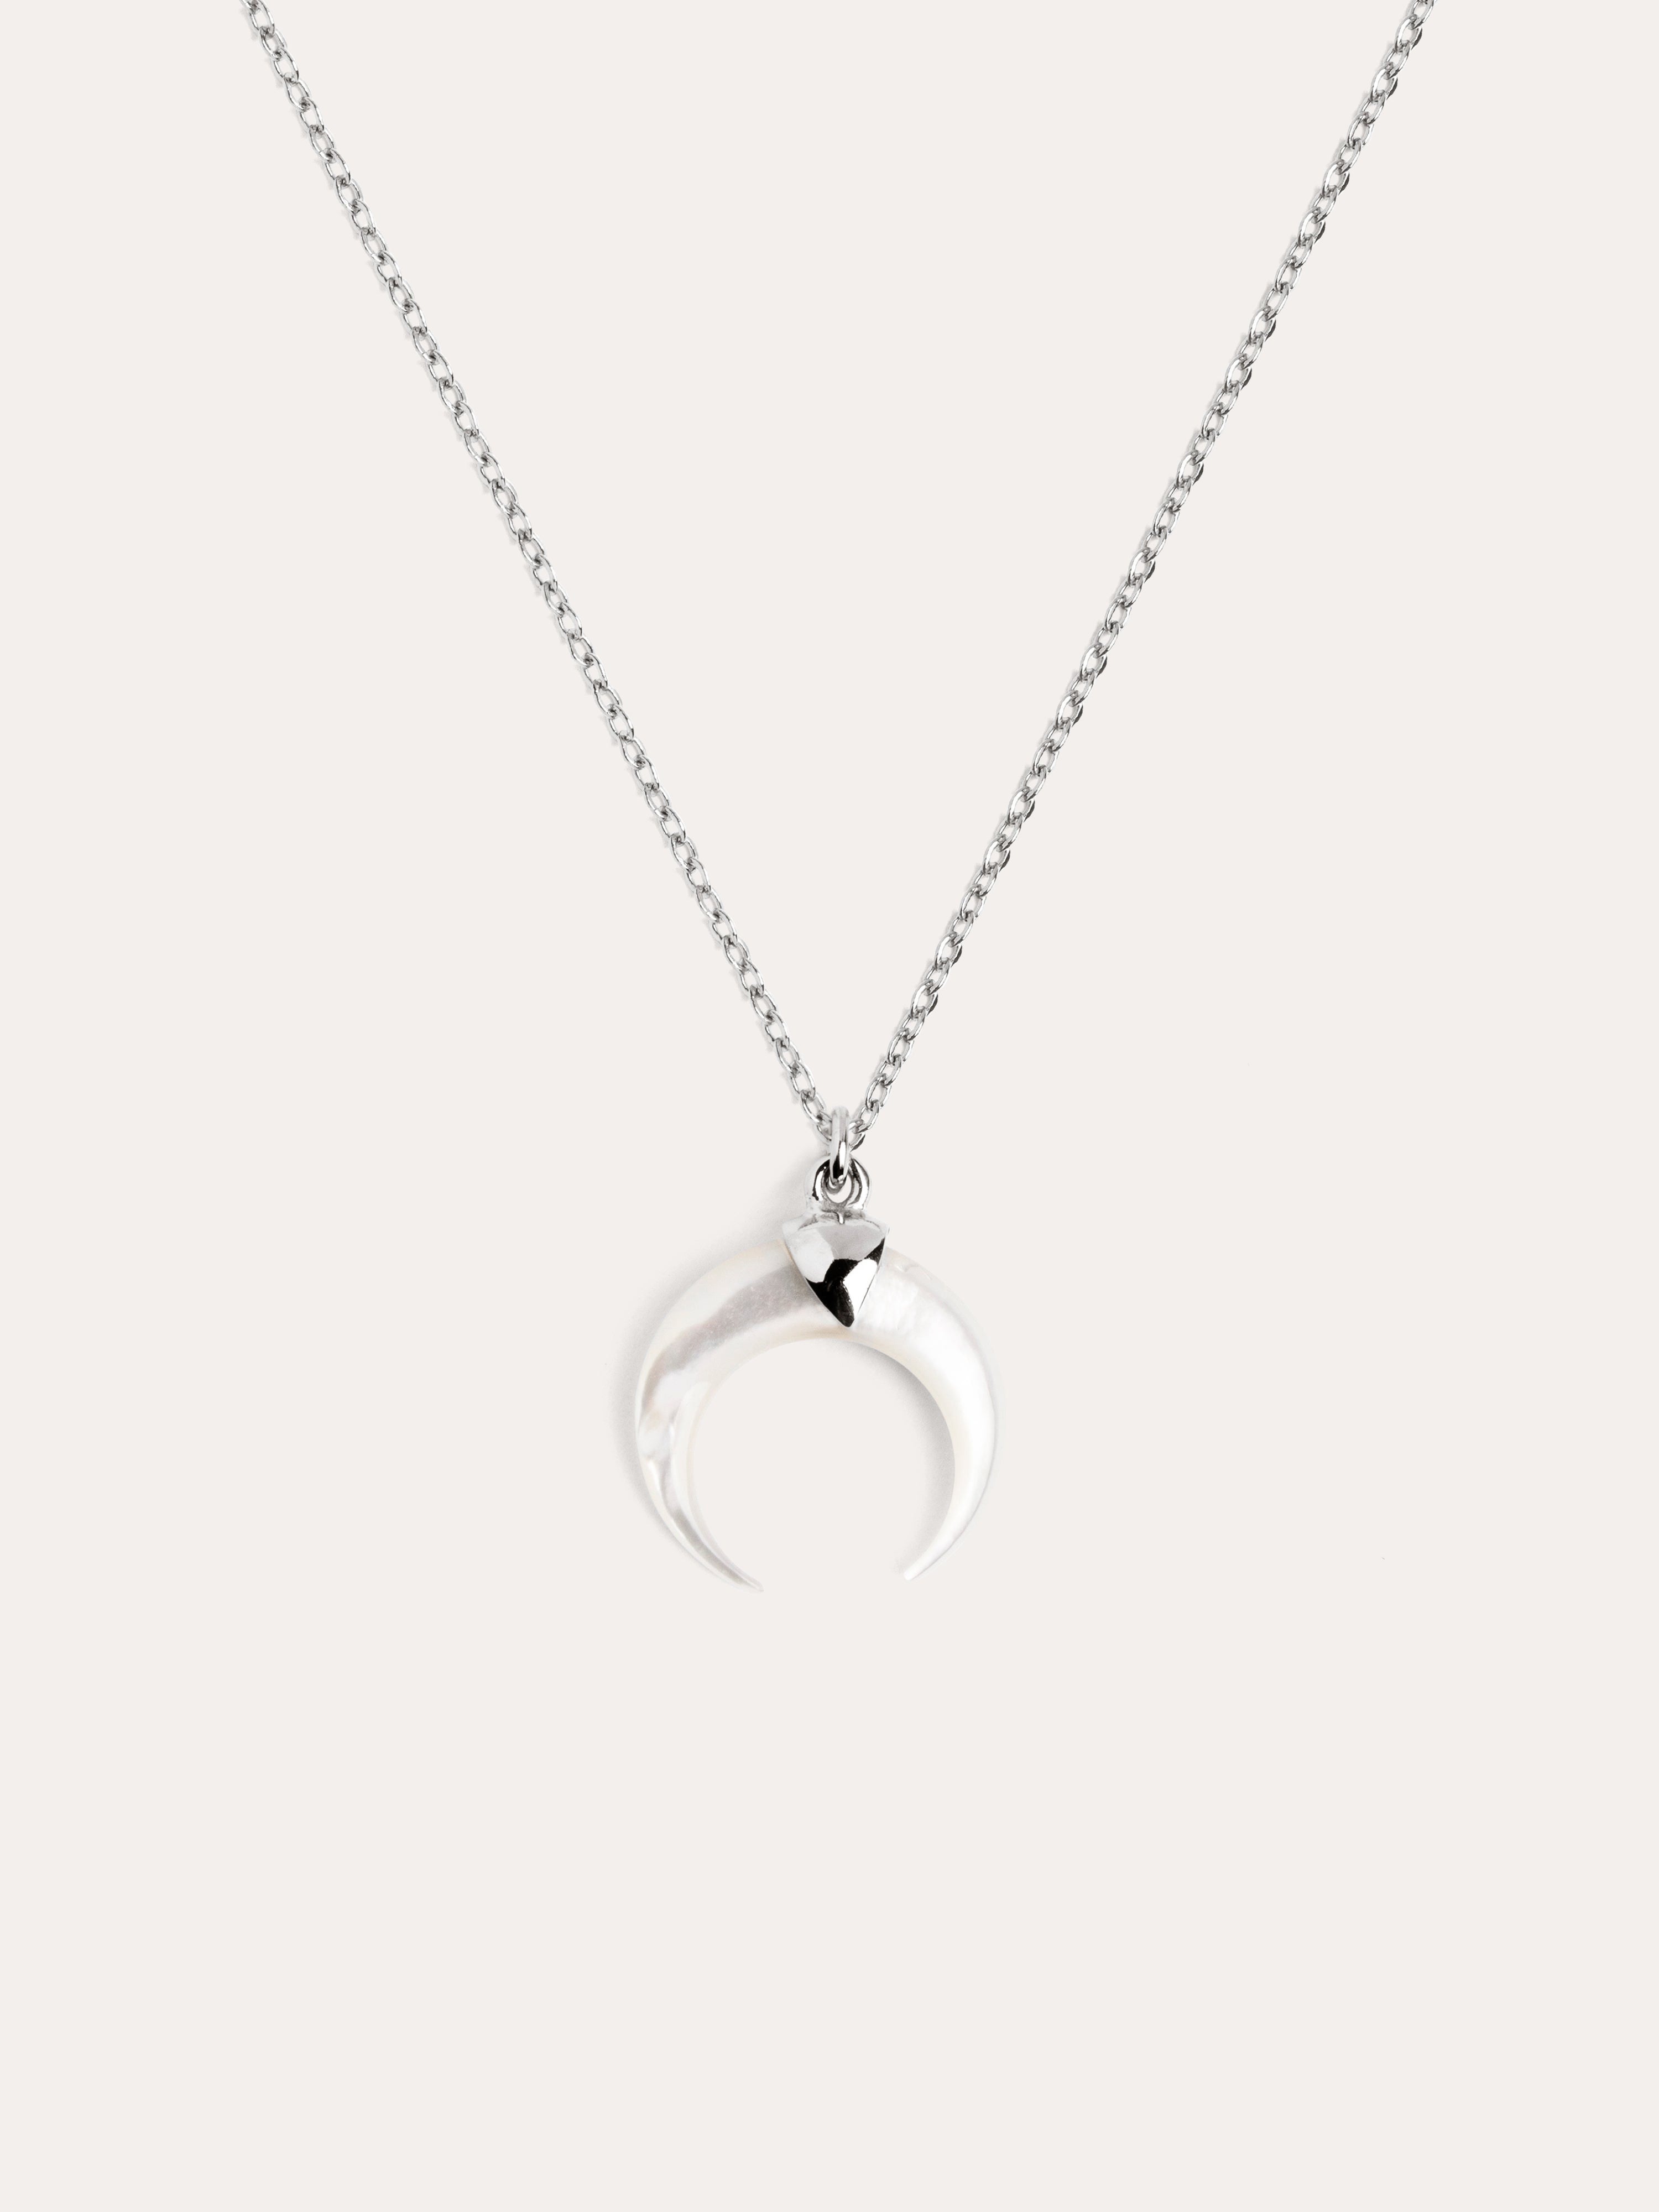 Moonset Mother-of-Pearl Silver Necklace